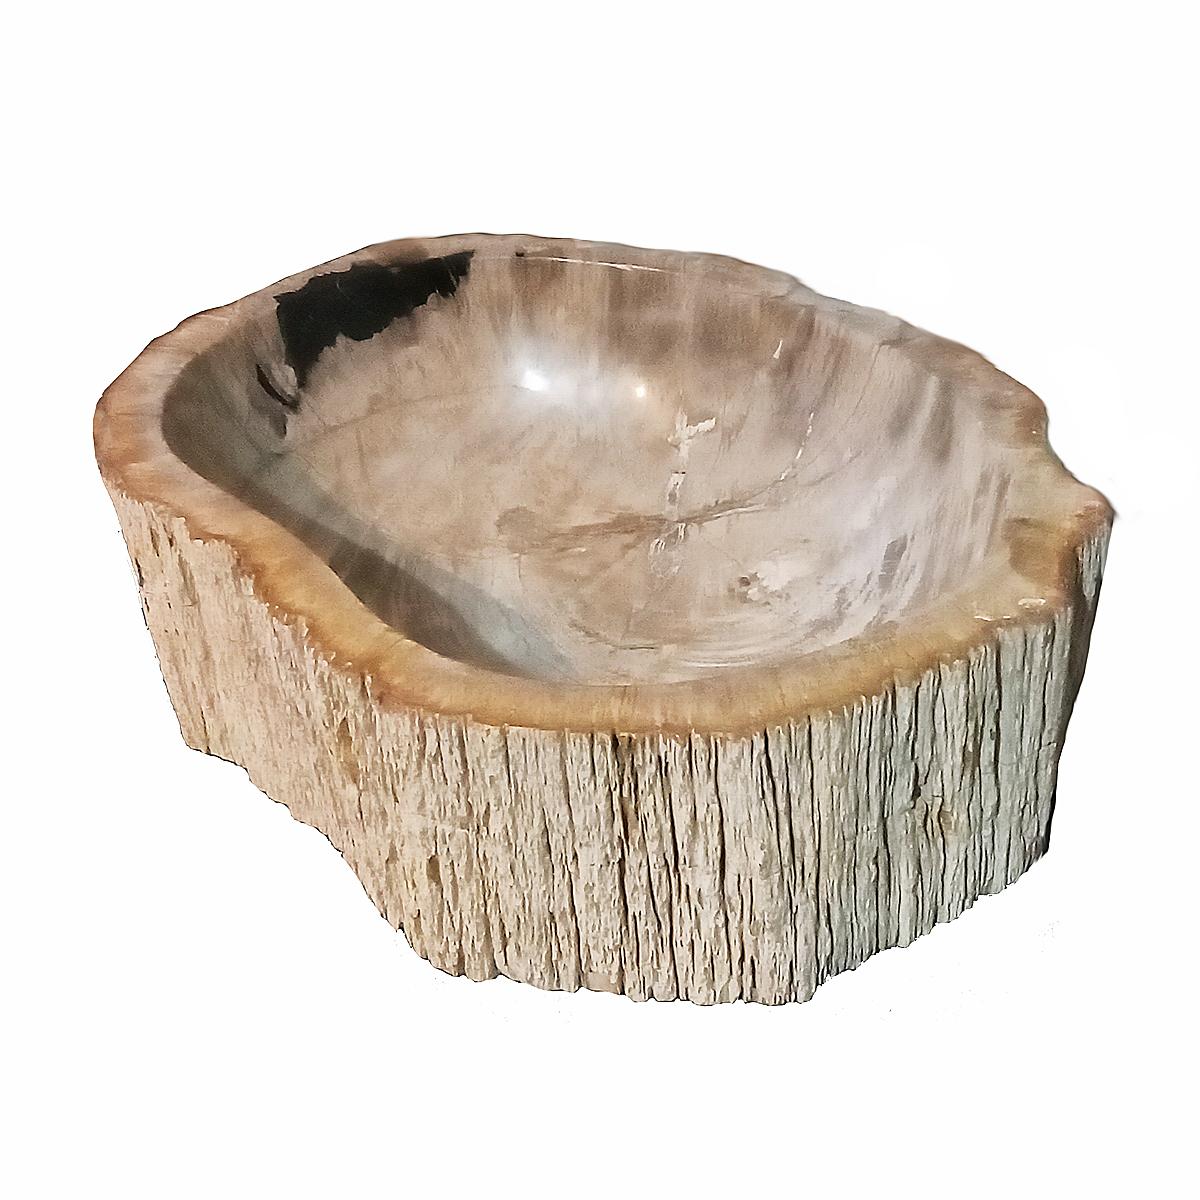 
This stunning bowl is crafted out of a single solid piece of petrified wood, in naturally occurring colors like cream, taupe and black.  Cut and polished to reveal the spectacular veining and colors of the rock-solid wood. At 7 in the Mohs scale,